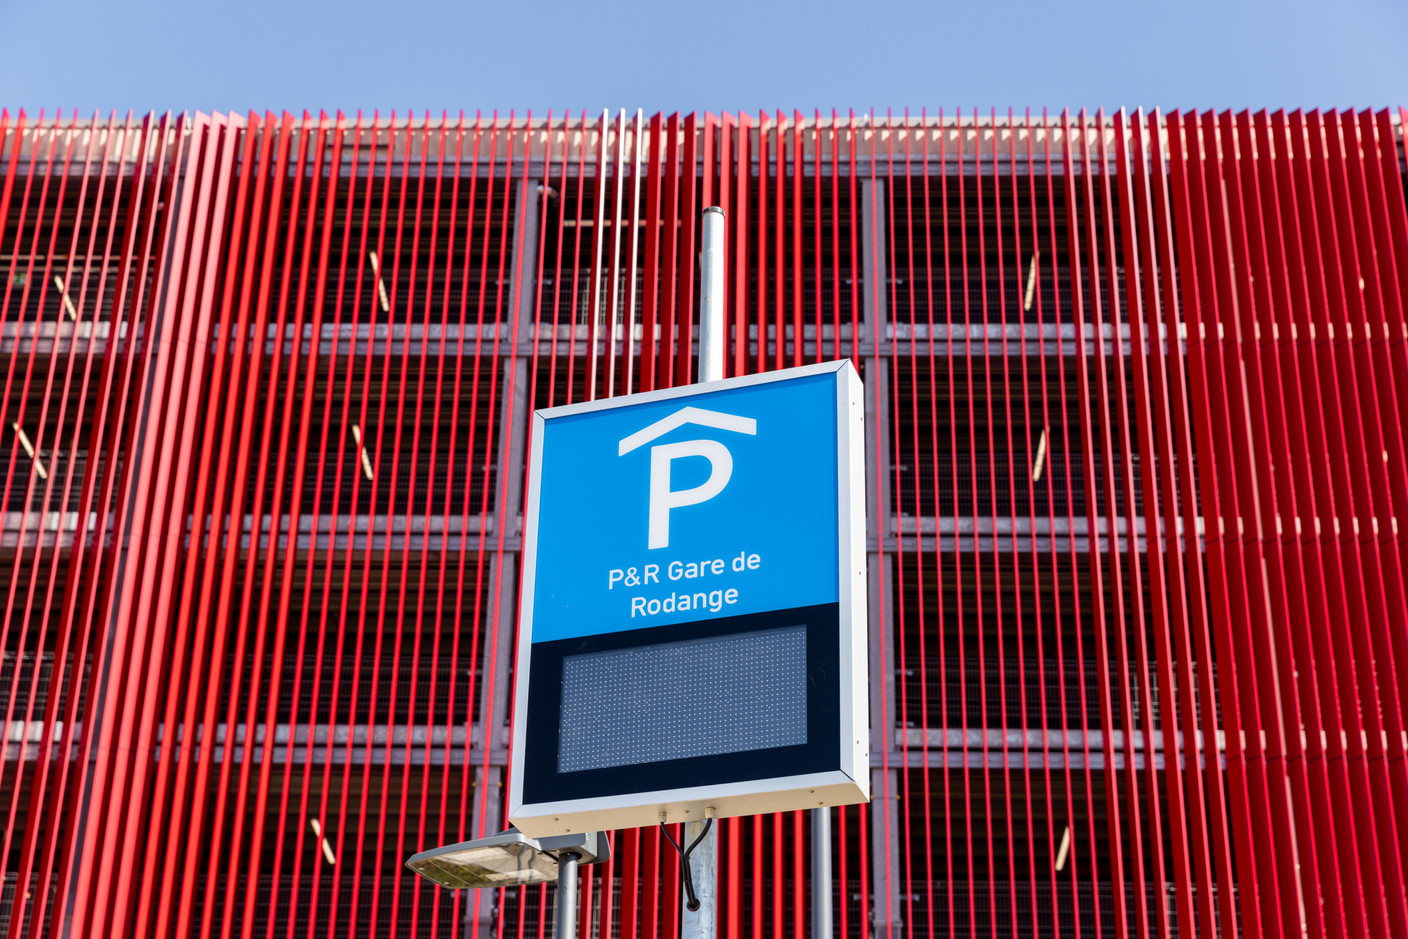 The capacity of the car park will be almost 1,600 spaces. Photo: Romain Gamba/Maison Moderne